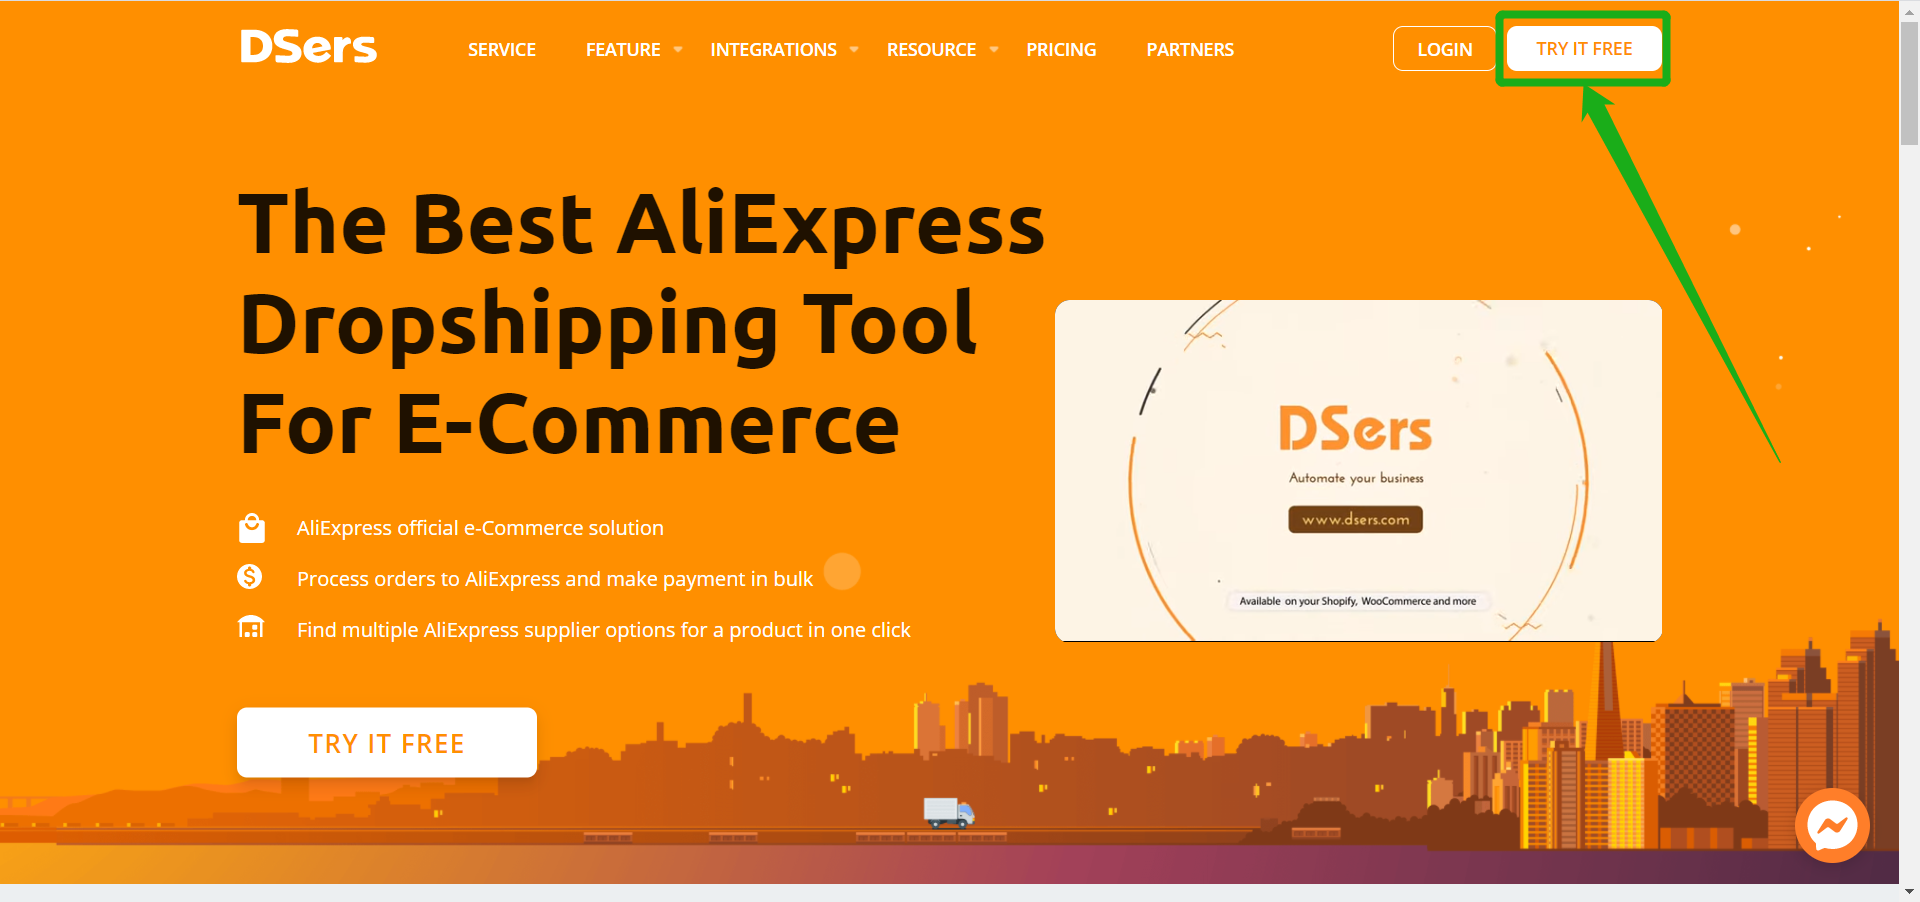 Link your Shopify store - DSers Homepage - DSers